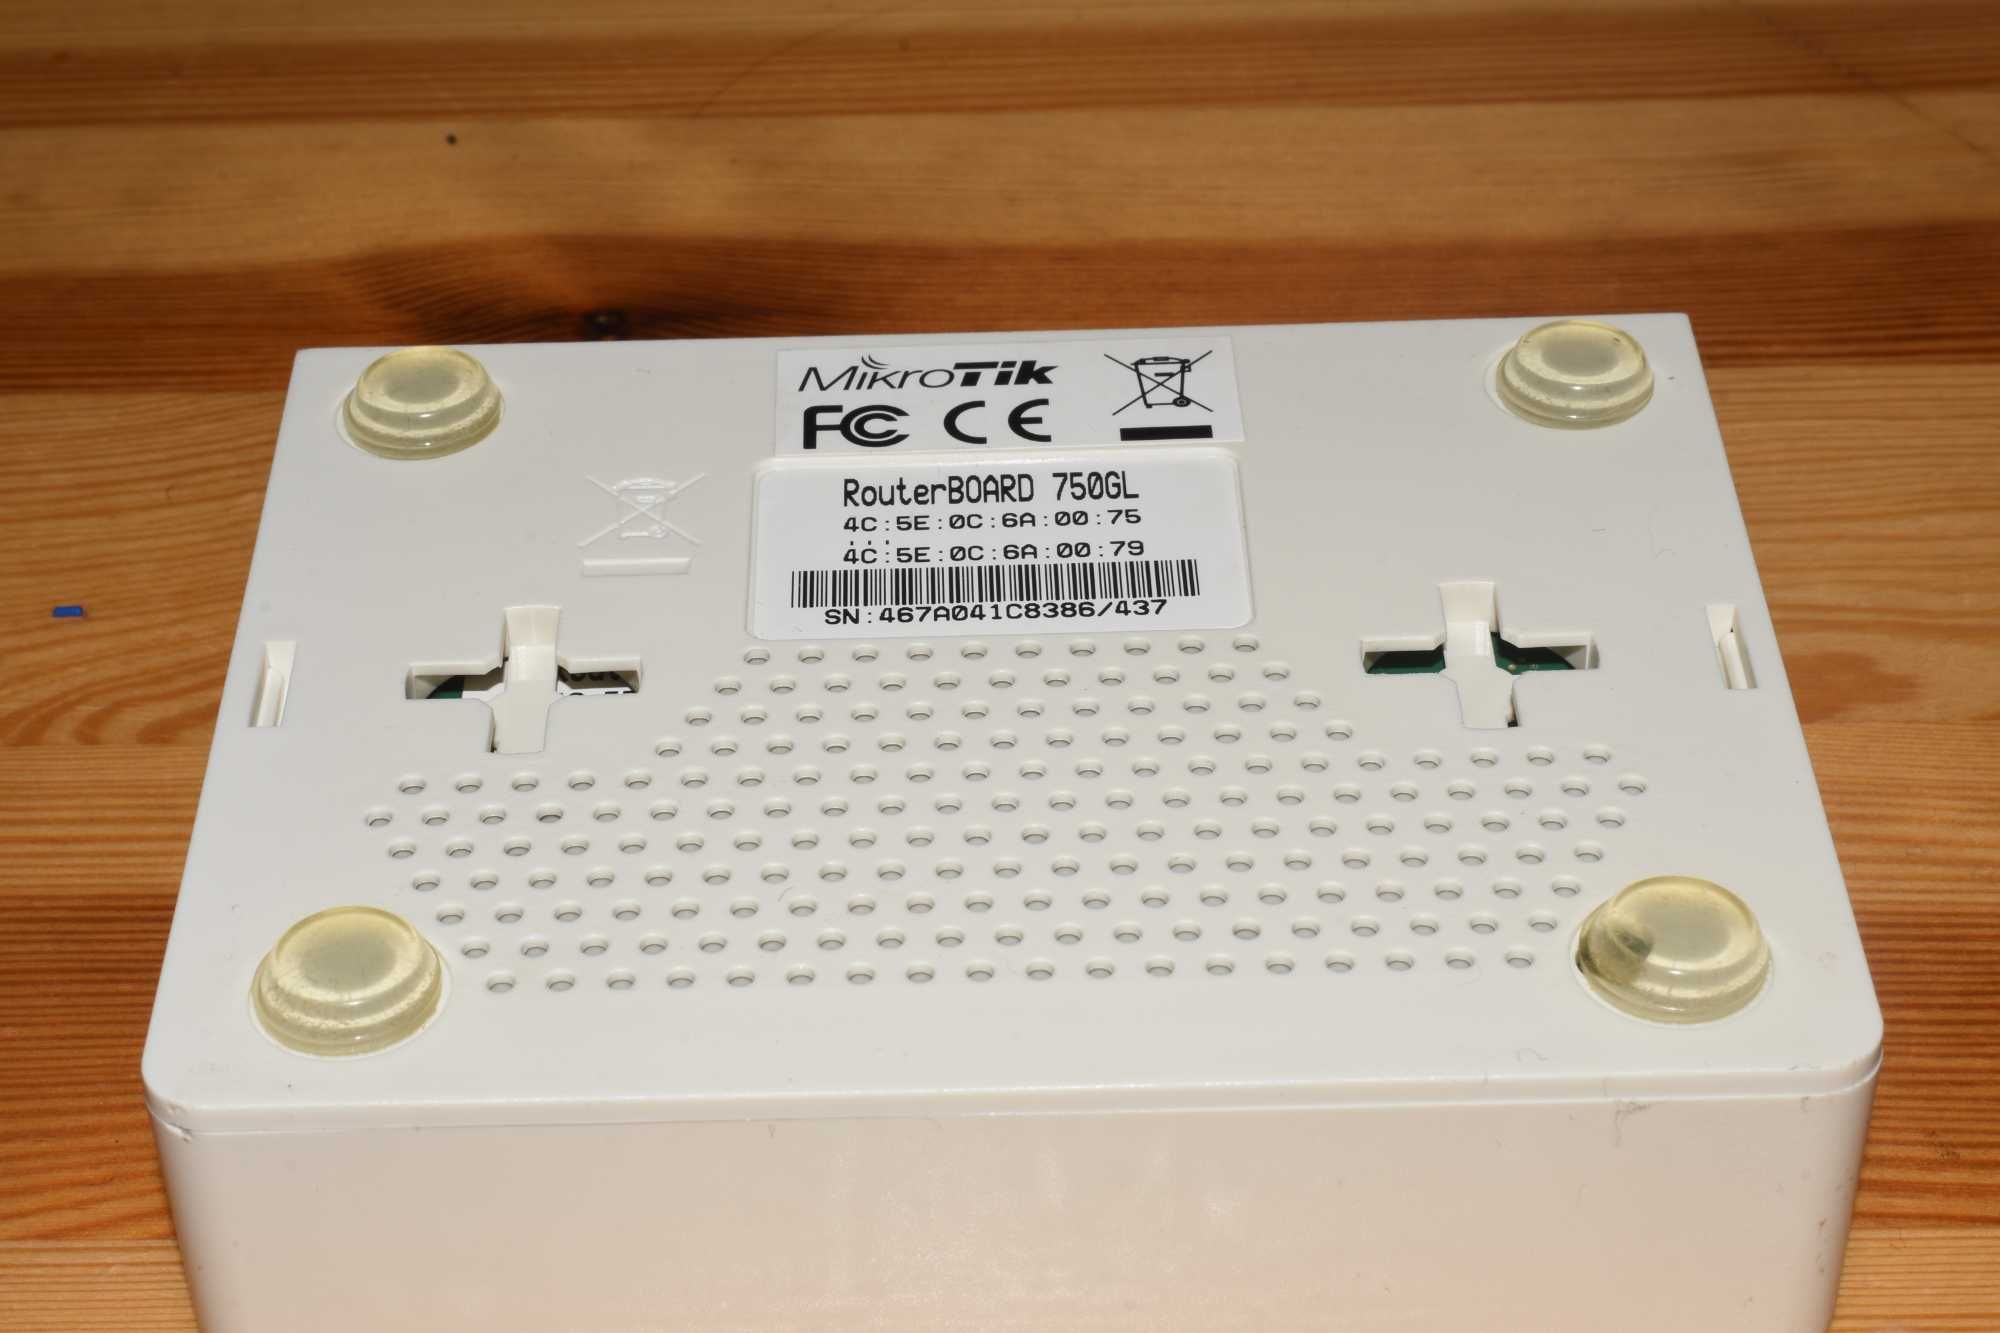 Router Mikrotik routerboard 750gl